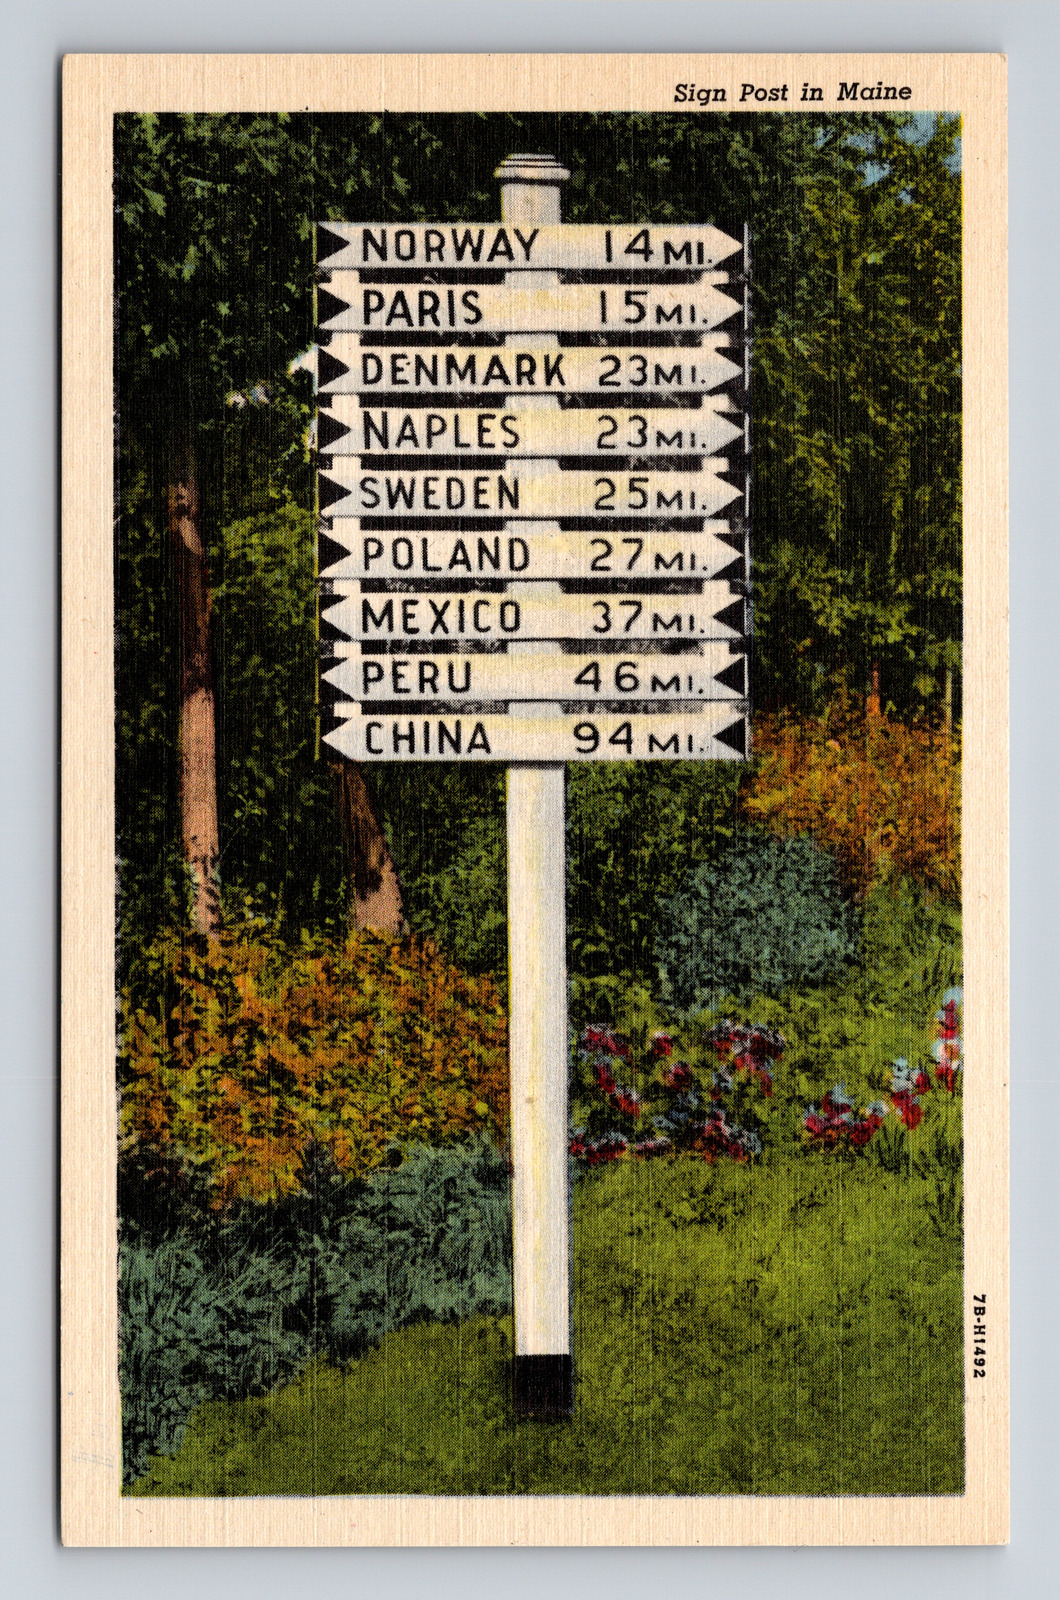 c1947 Linen Postcard ME Maine Sign Post in Maine Miles to World Cities